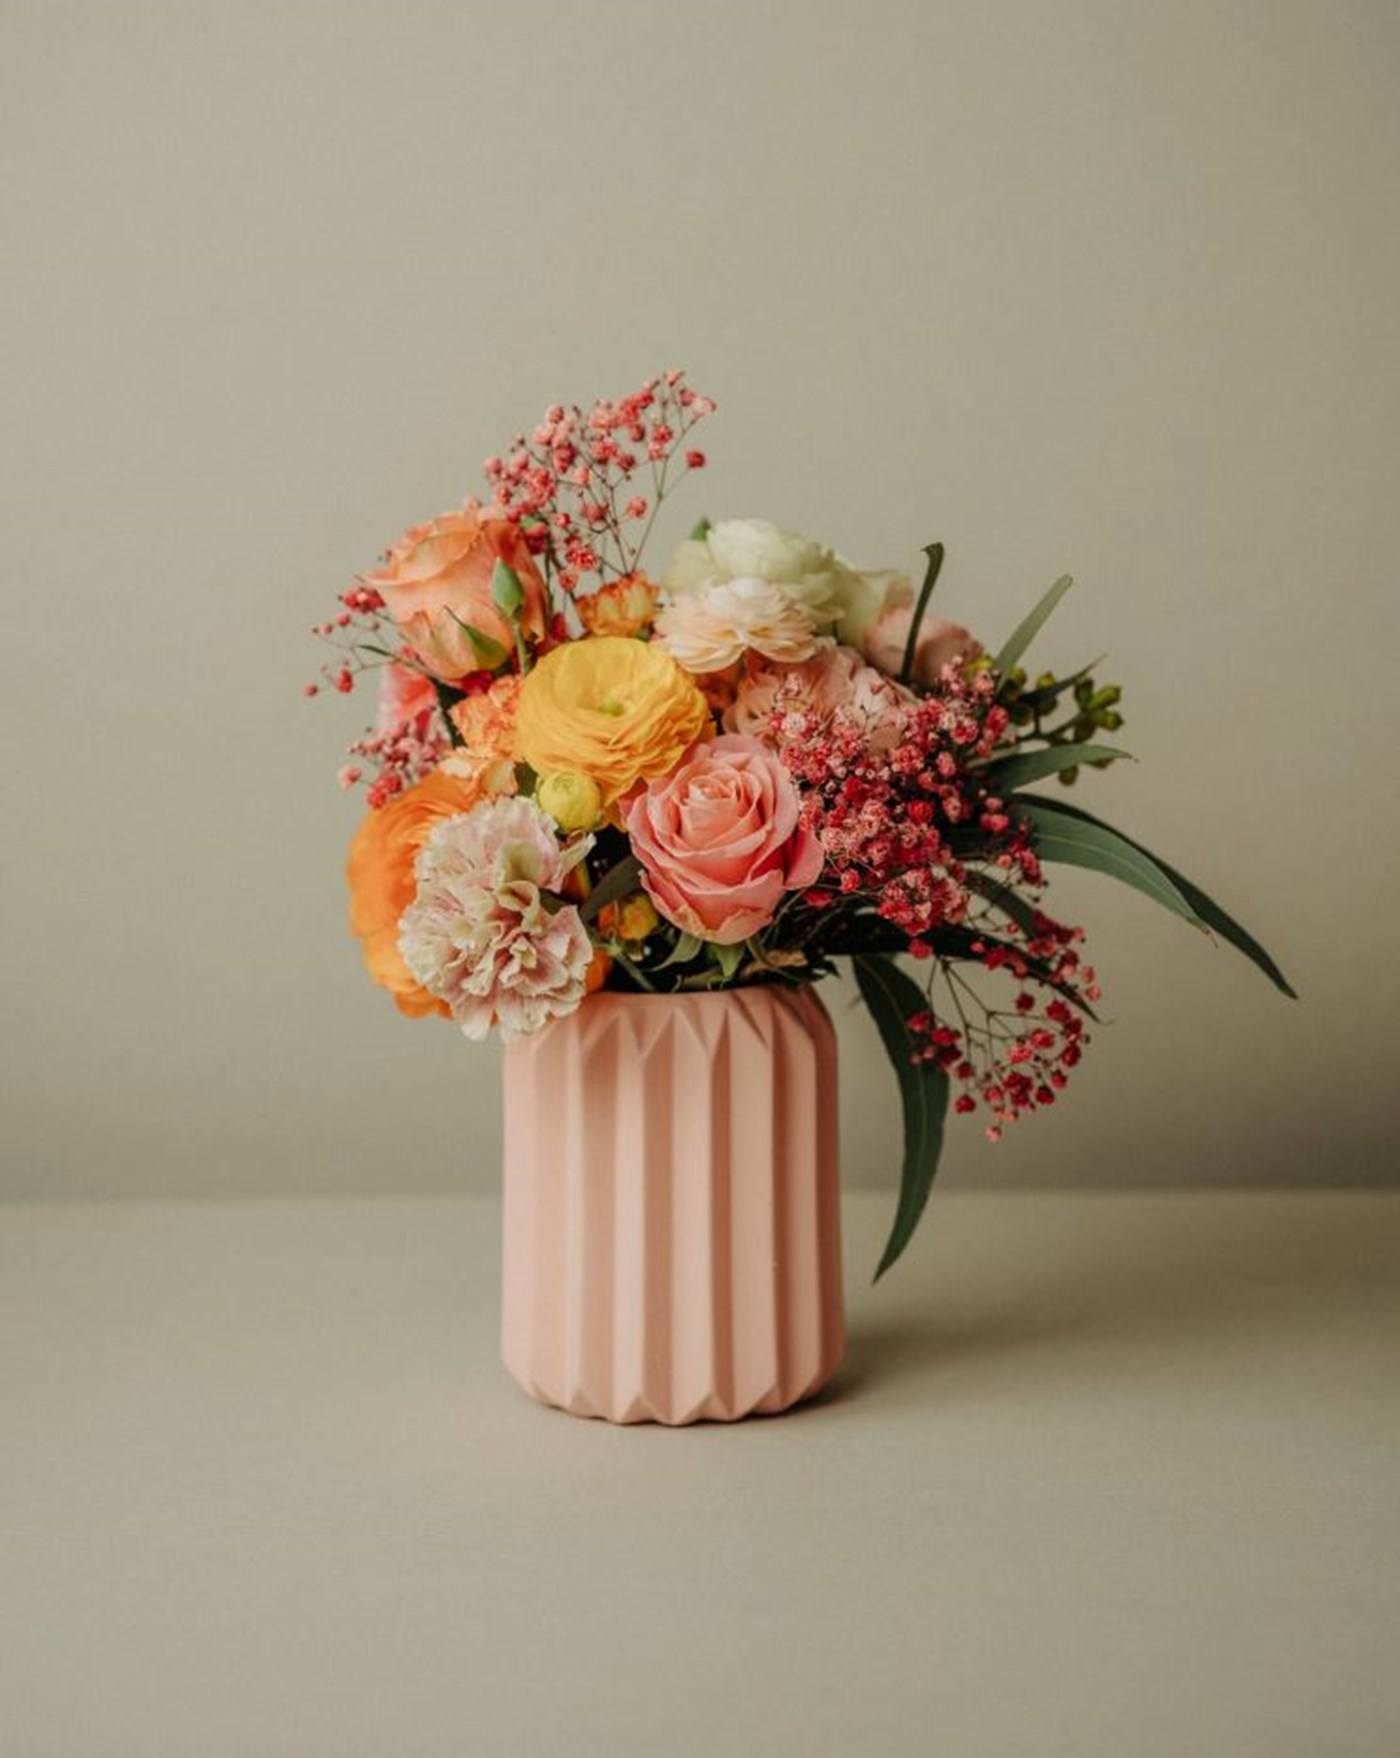 Flower Delivery In Melbourne The Best Florists For Beautiful Blooms Sitchu Melbourne